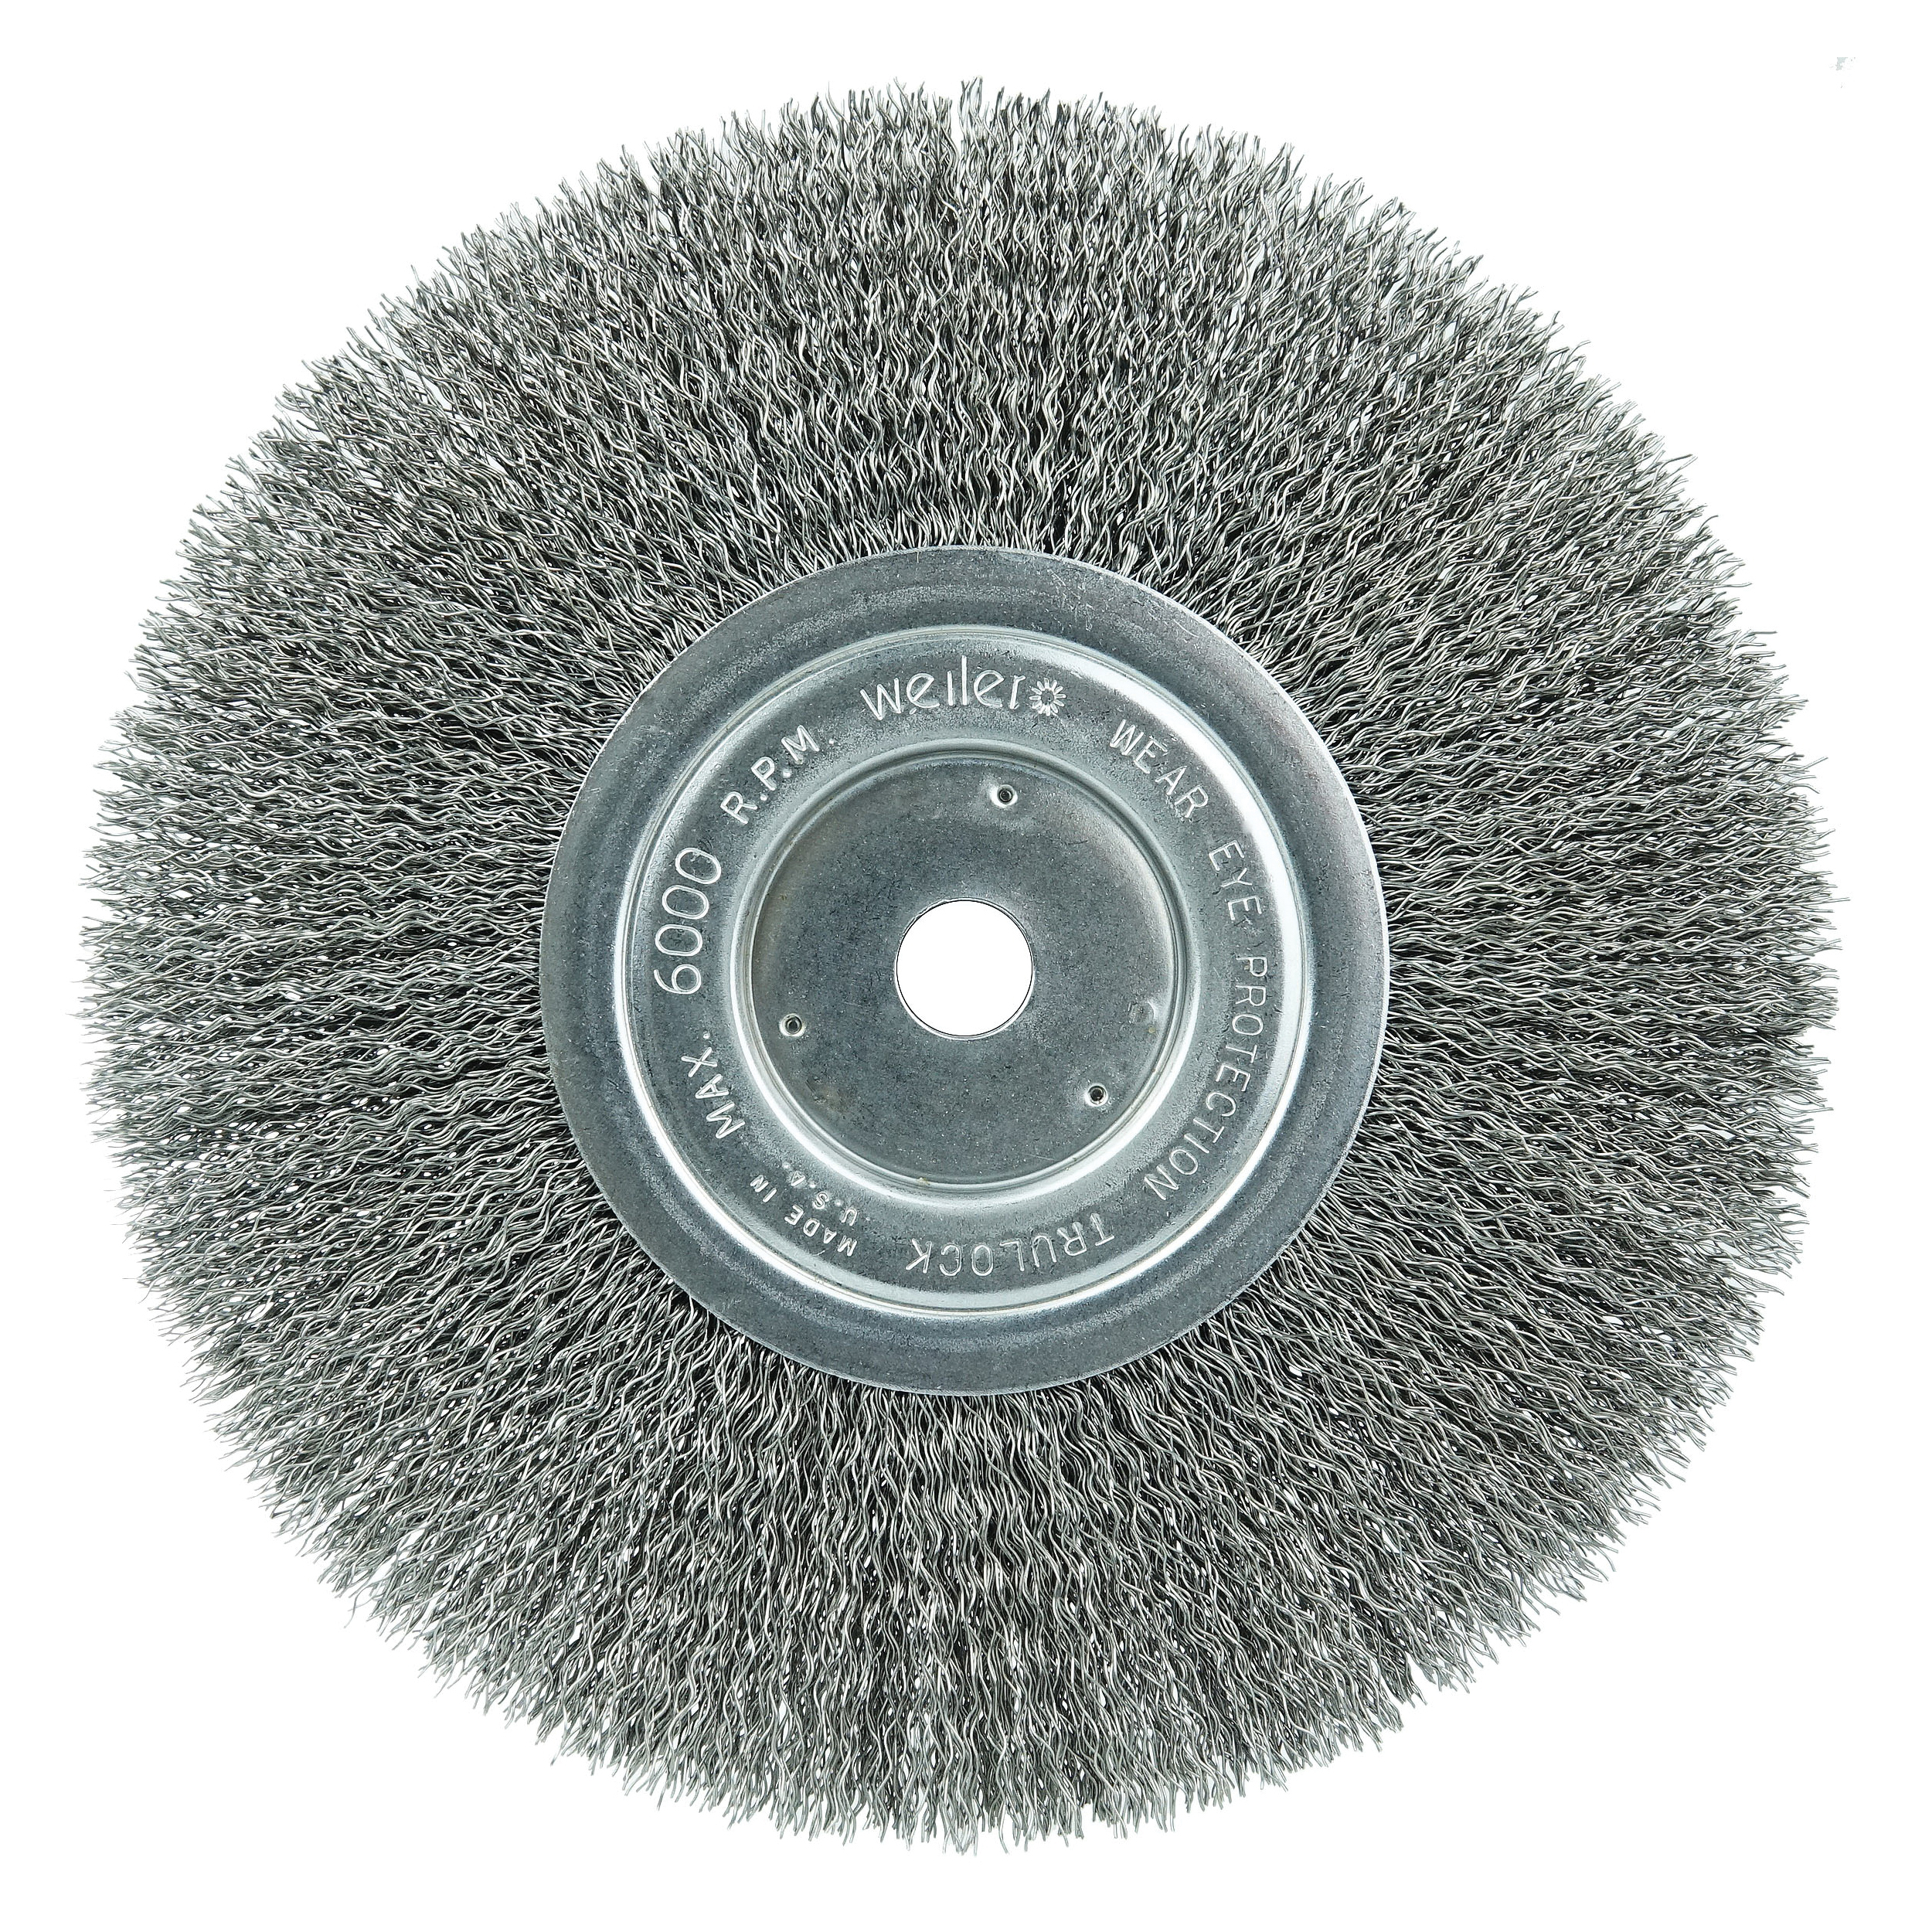 Weiler® 01075 TLN-6 Narrow Face Wheel Brush, 6 in Dia Brush, 3/4 in W Face, 0.014 in Dia Filament/Wire Crimped Filament/Wire, 1/2 to 5/8 in Arbor Hole